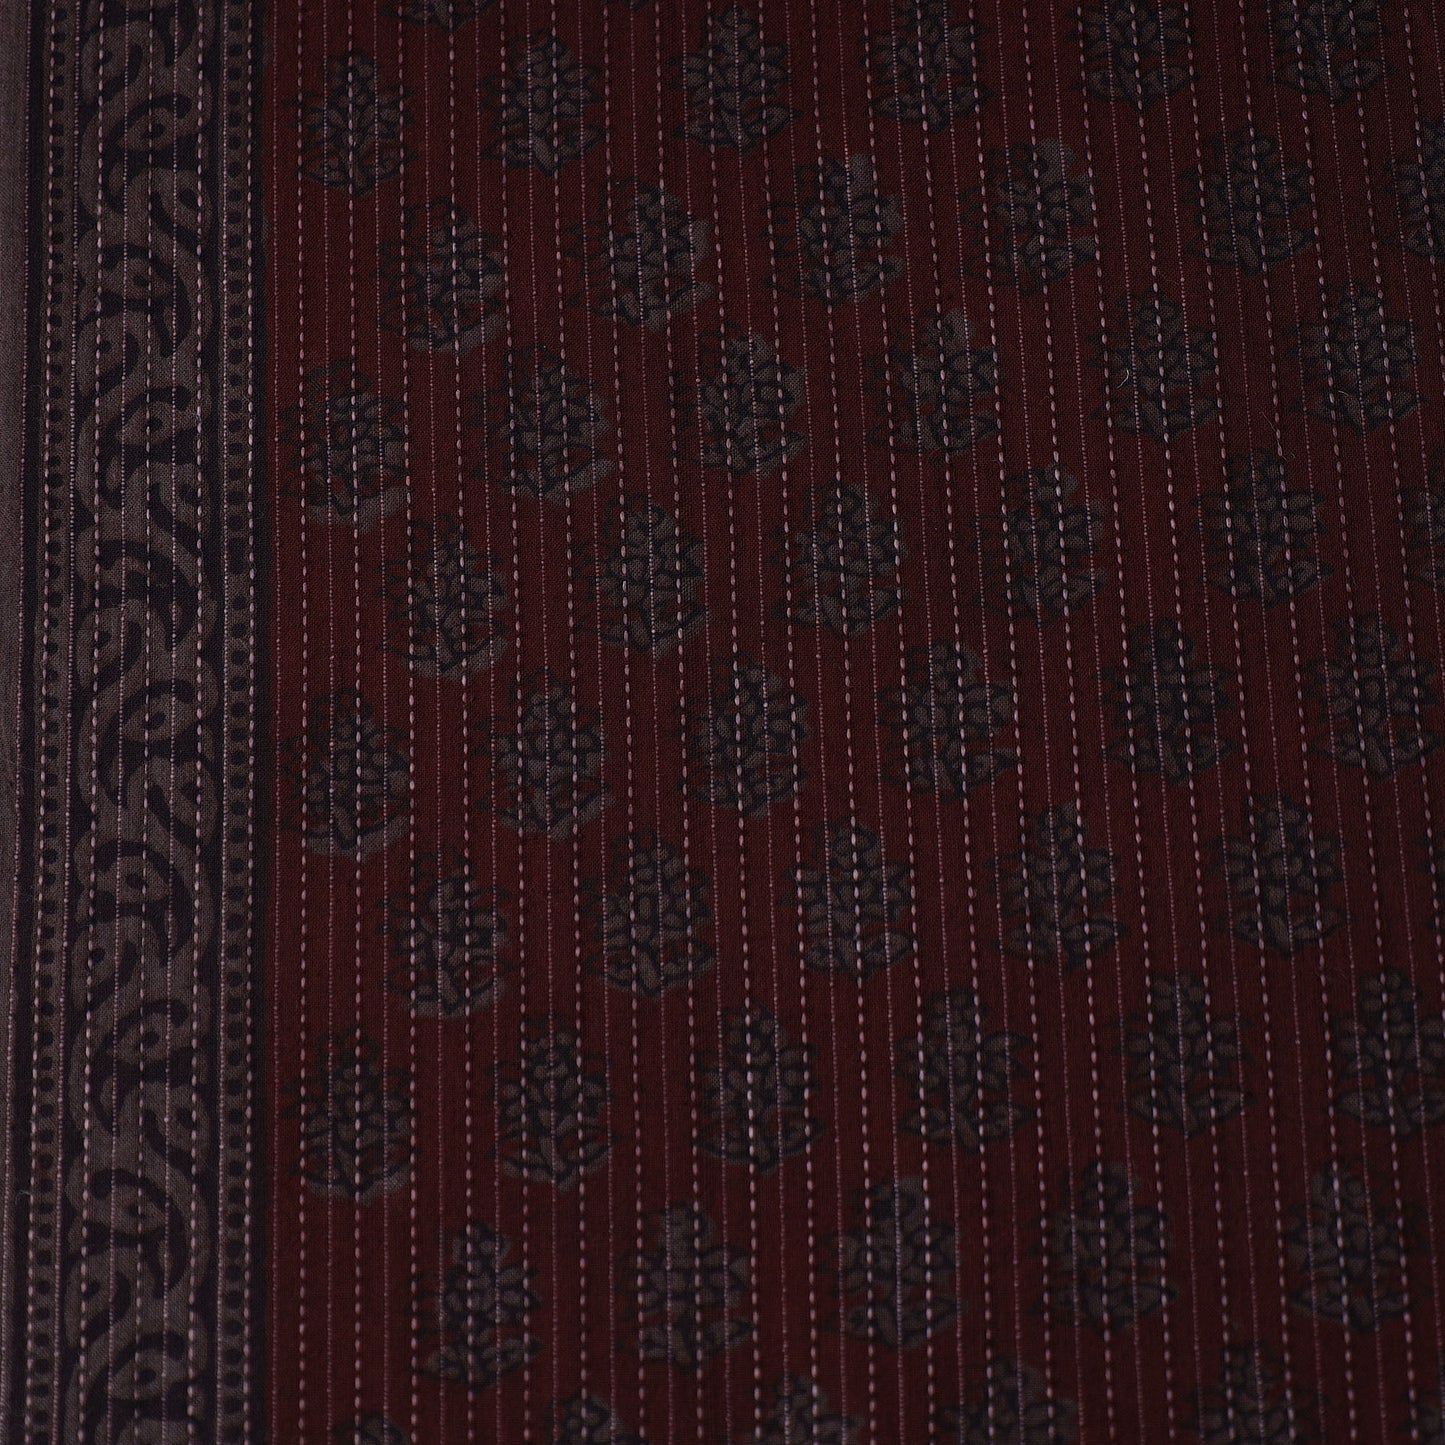 Maroon - Bagh Block Printed Kantha Style Cotton Fabric 15